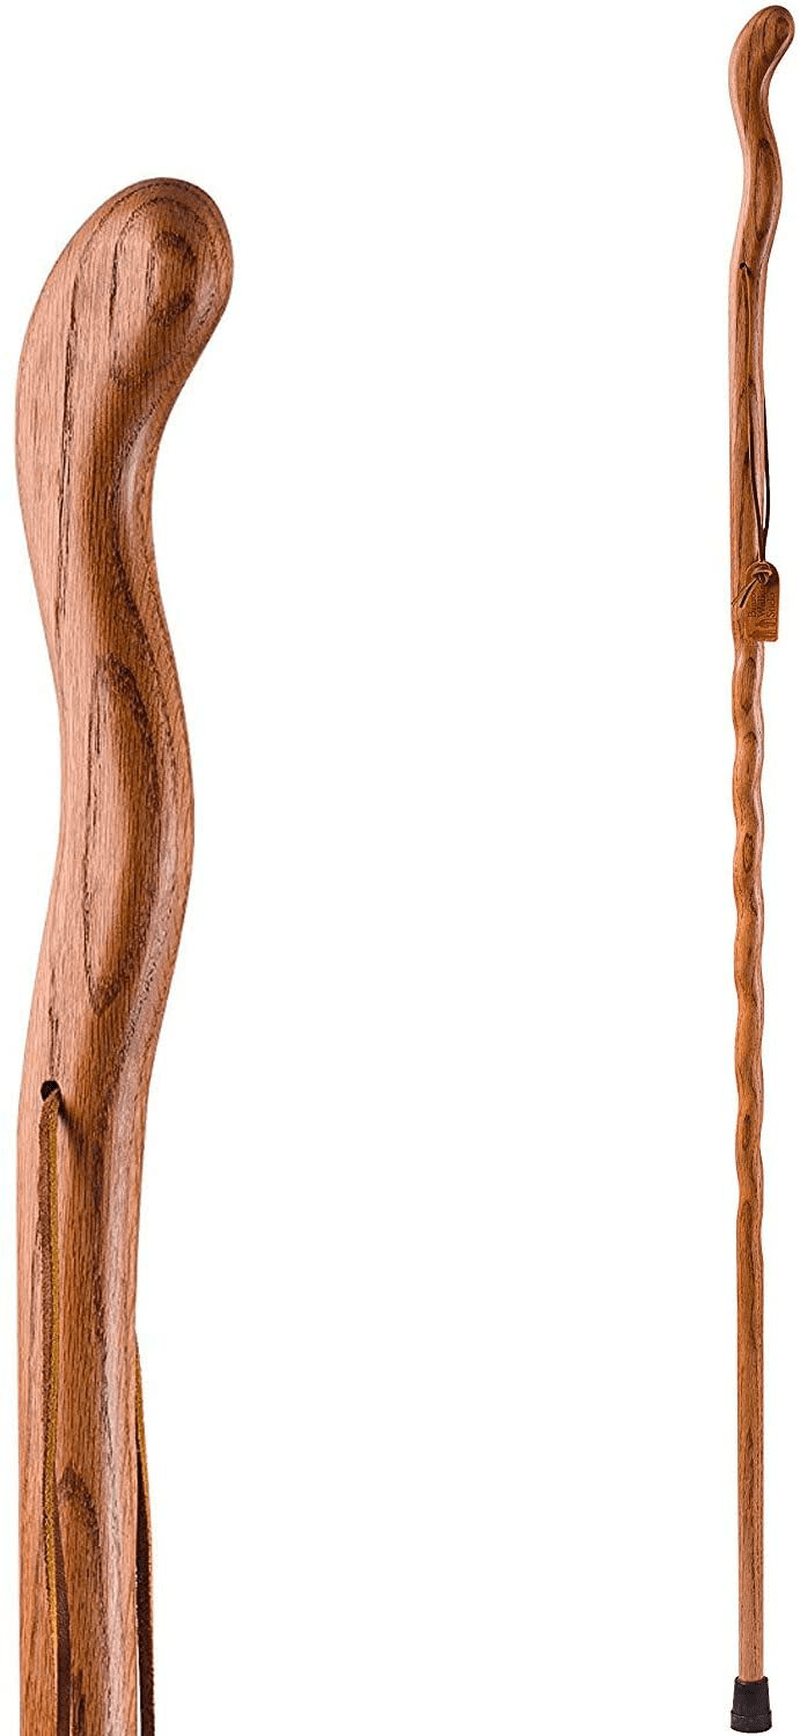 Brazos Trekking Pole Hiking Stick for Men and Women Handcrafted of Lightweight Wood and Made in the USA, Tan Oak, 48 Inches (602-3000-1089) Sporting Goods > Outdoor Recreation > Camping & Hiking > Hiking Poles Brazos   